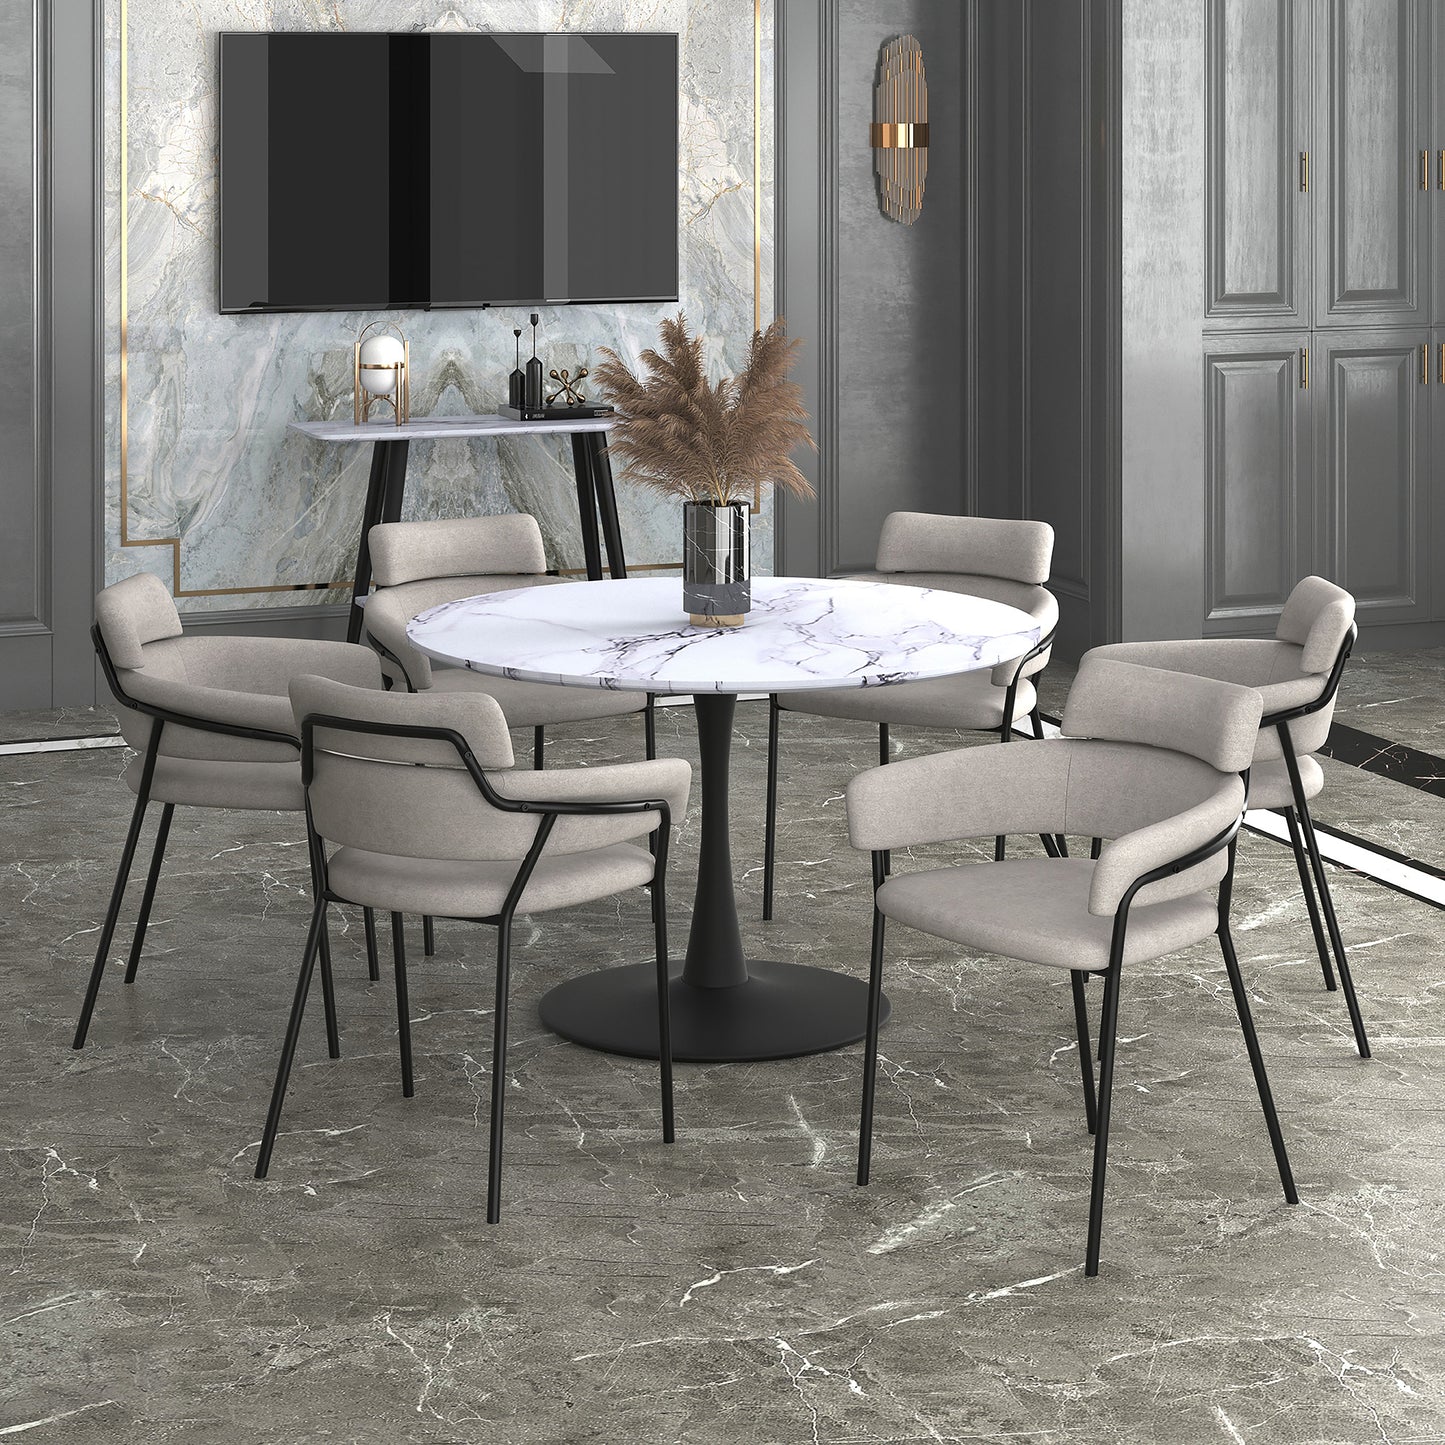 Zilo/Axel Large Dining Set in Black with Grey Chair (Table + 6 Chairs)